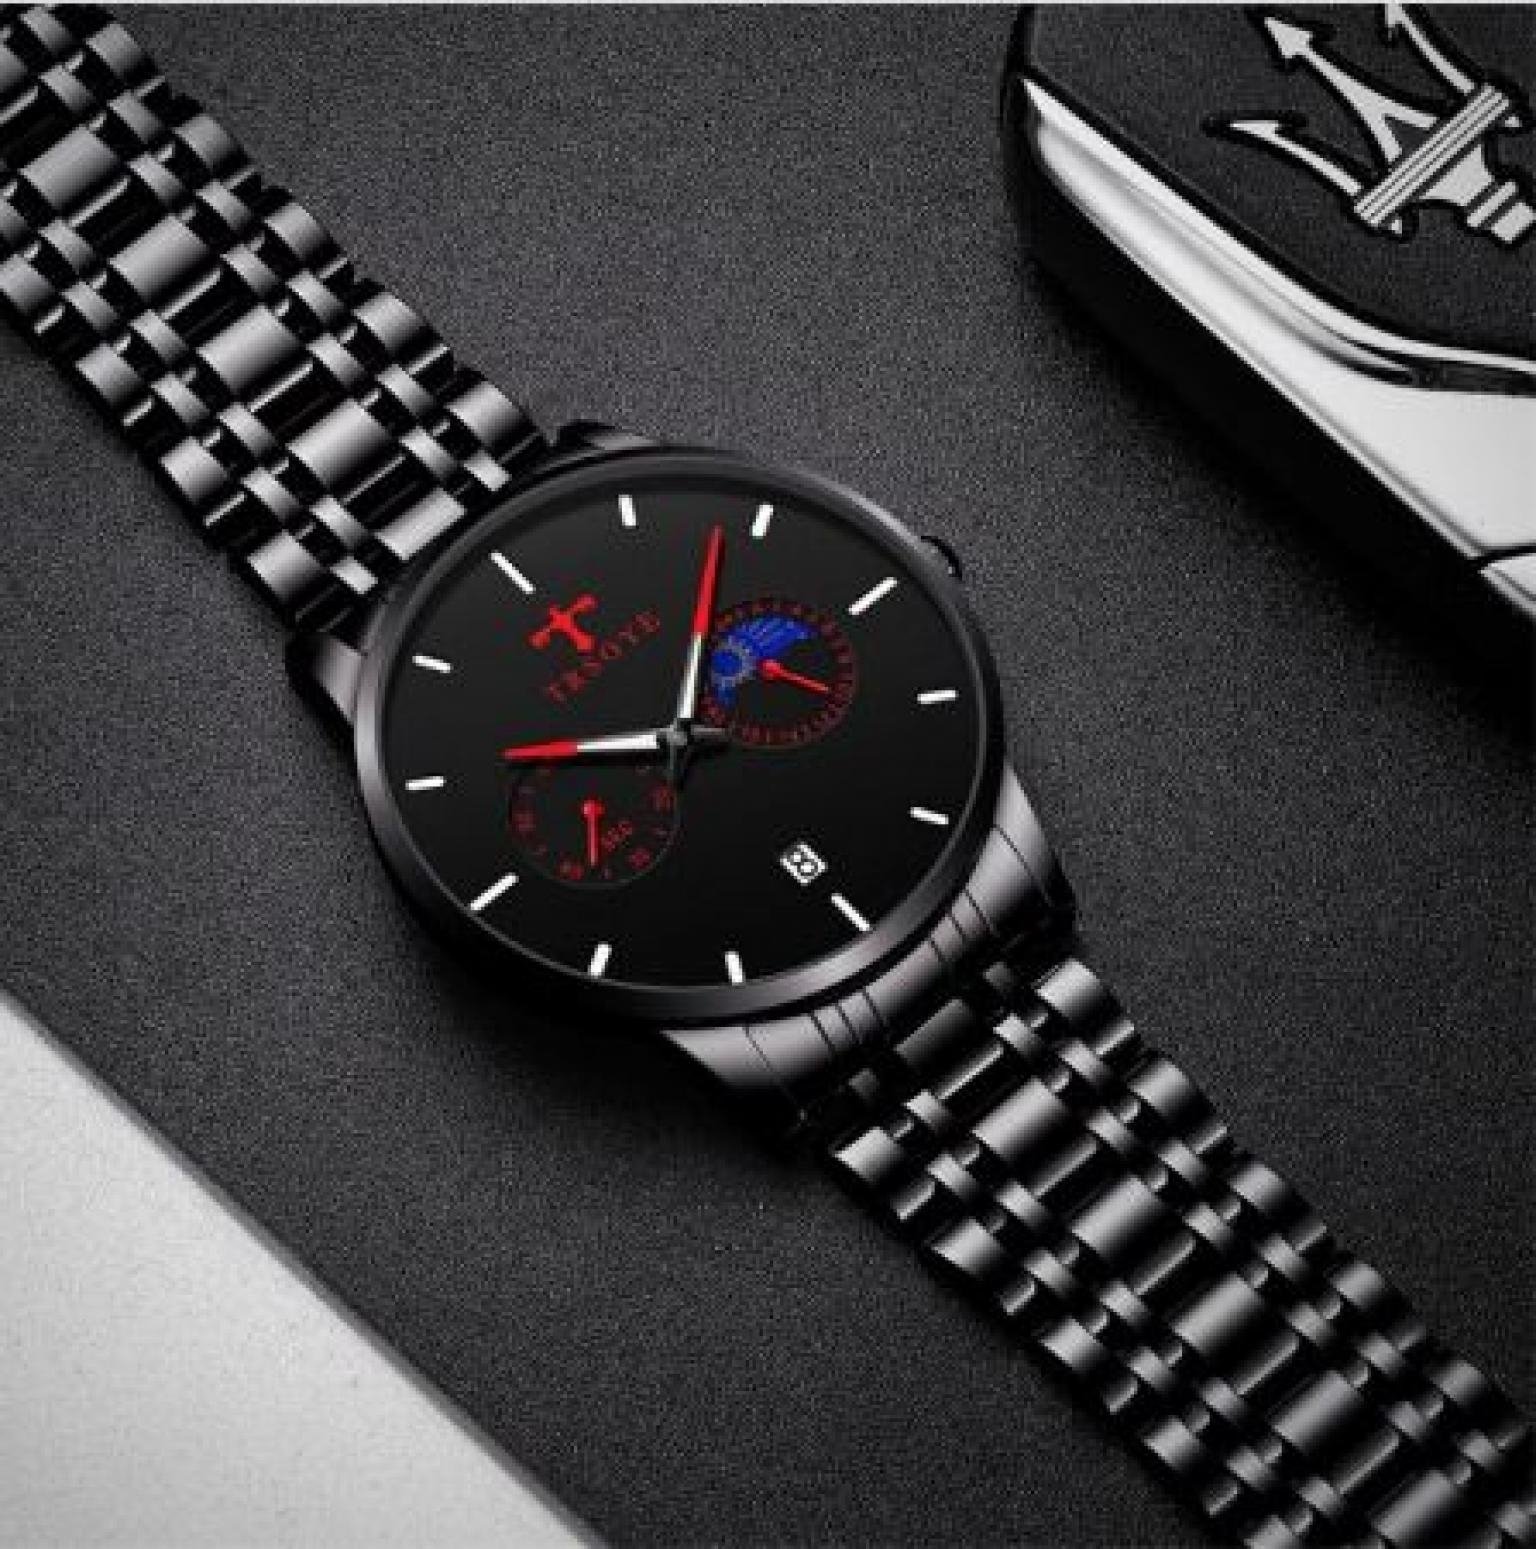 TRSOYE 658 Casual Black Men's Watch 24 Hours Day and Night Moon Phase Waterproof Men Wristwatch 10mm Ultra Thin Alloy Case